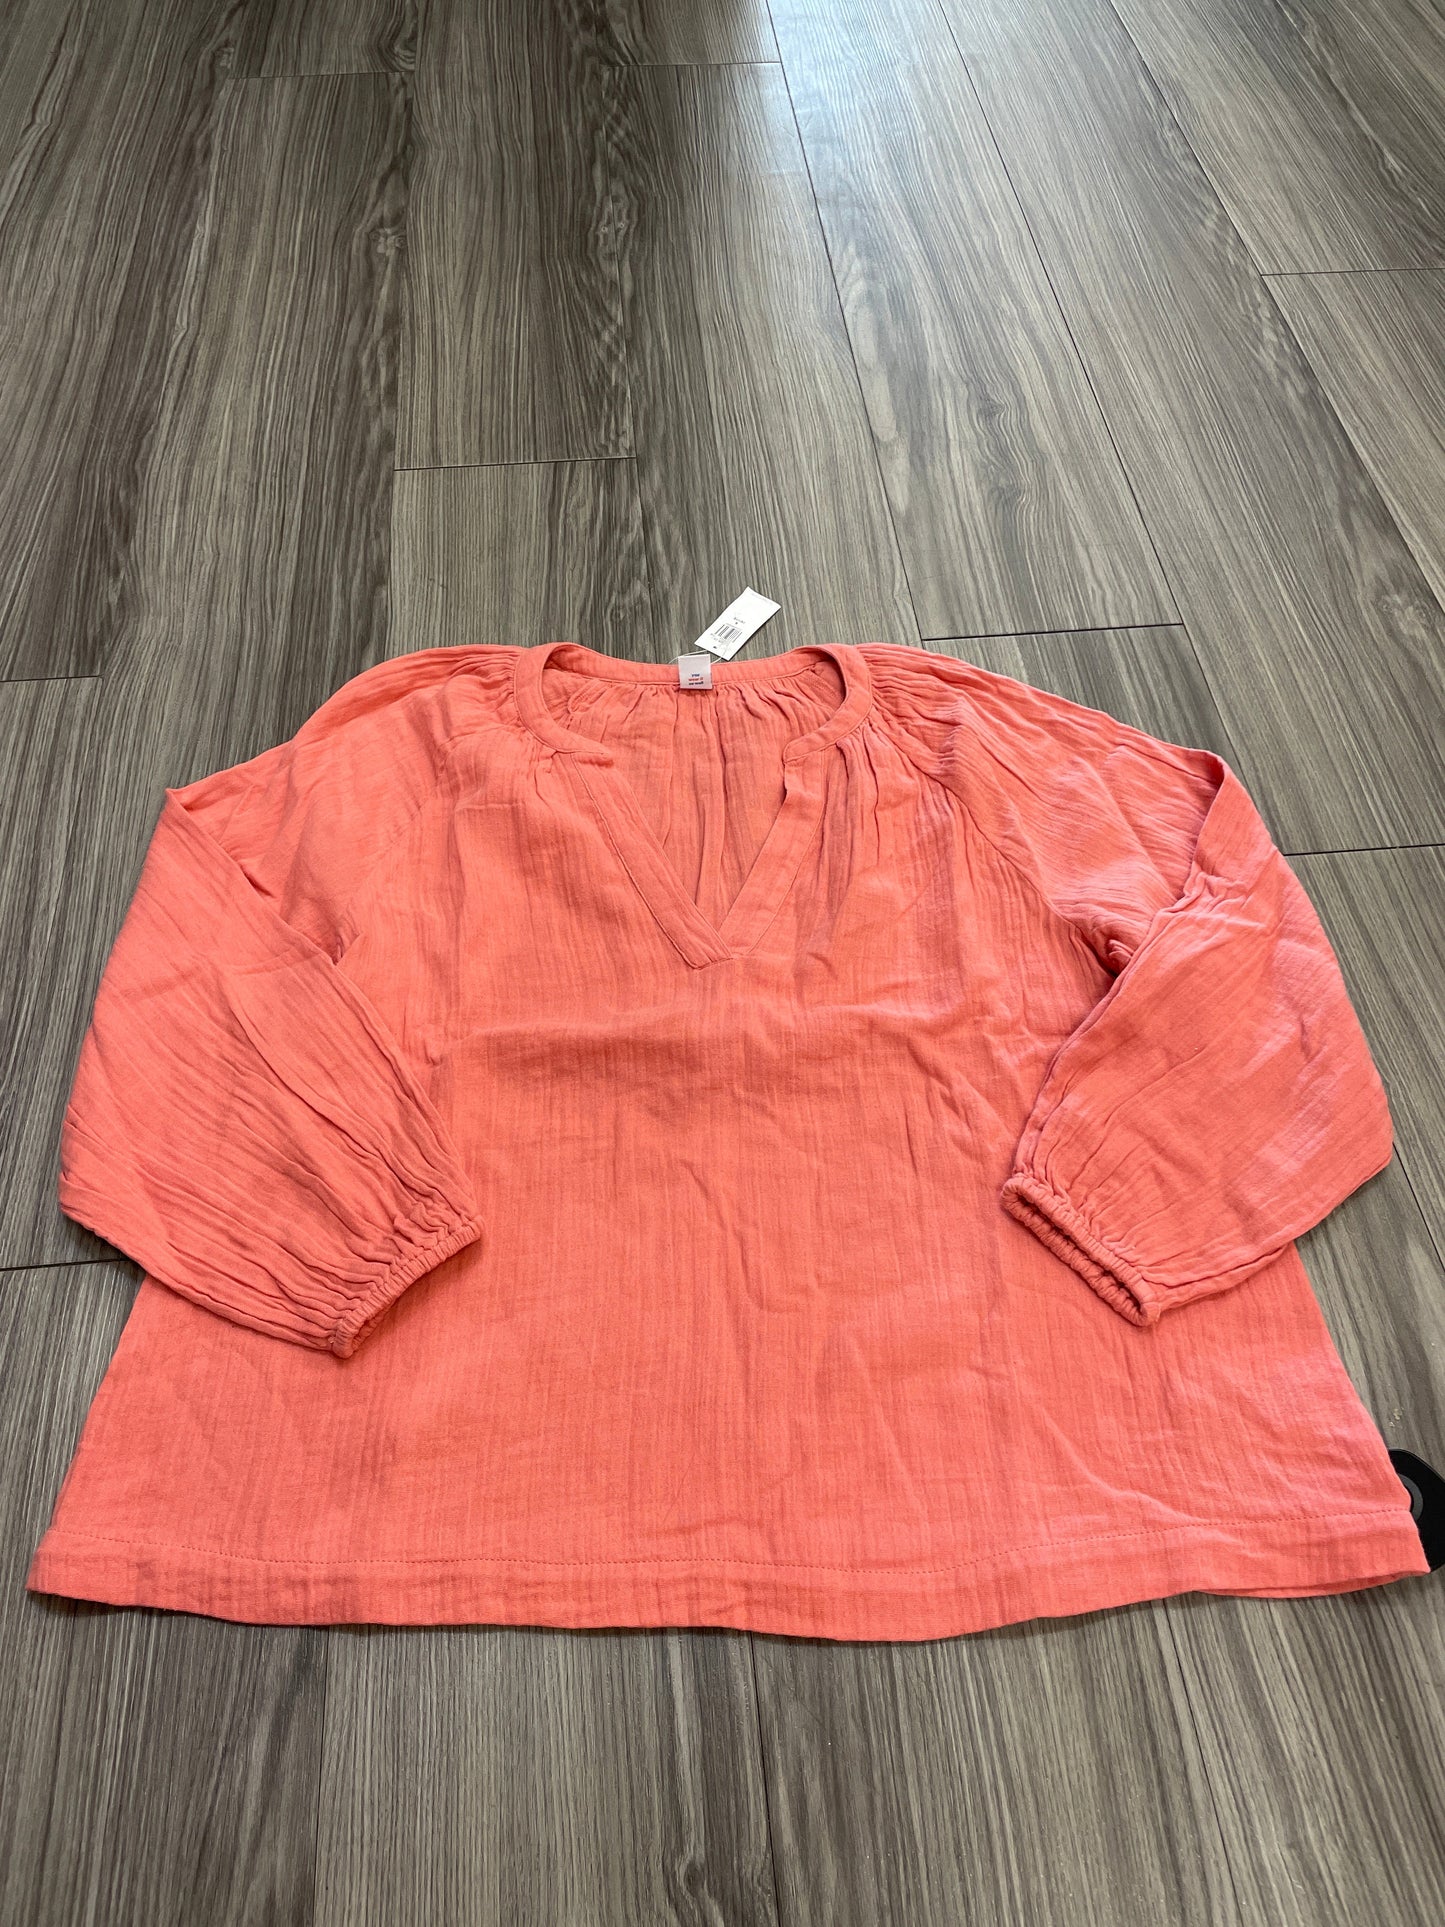 Coral Top Long Sleeve Old Navy, Size Petite   S